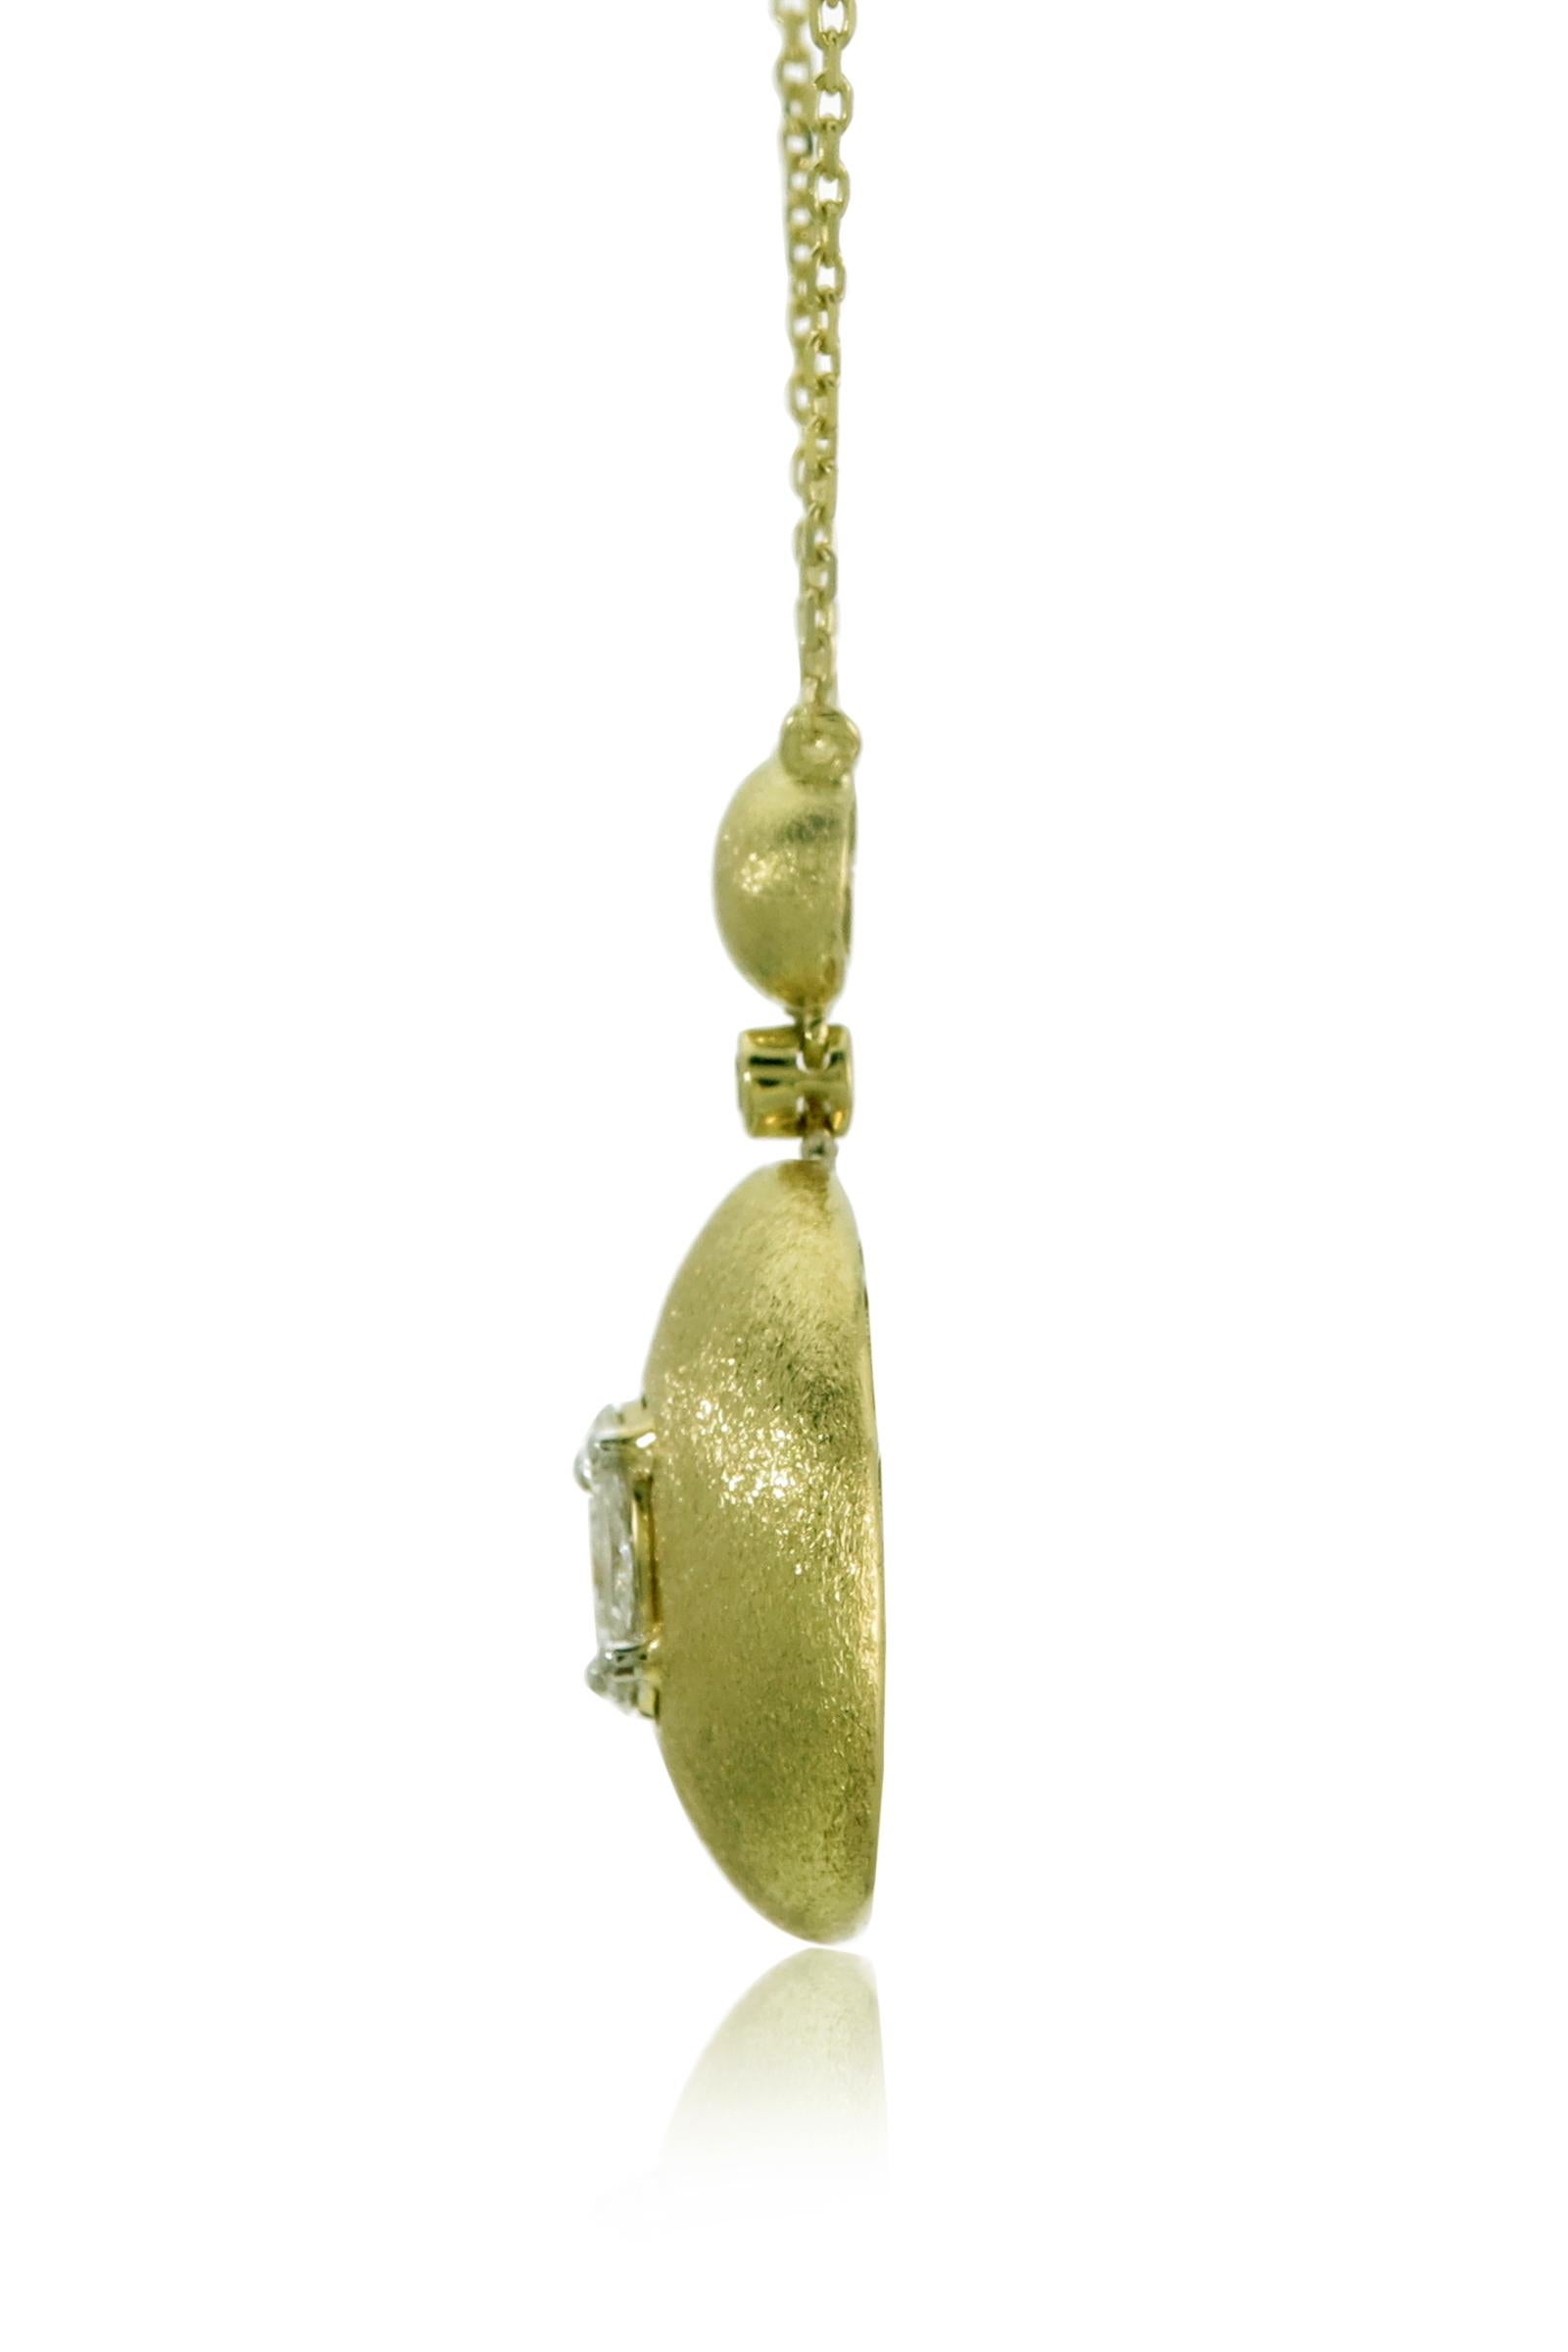 This 18K Yellow Gold cocktail Pendant Necklace features a luscious Pear shape White Diamond appx. 1.00 cts Illusion. Each diamond hand-selected by our experts for its superior luster and surface quality. Combine with glamorous outfits for a